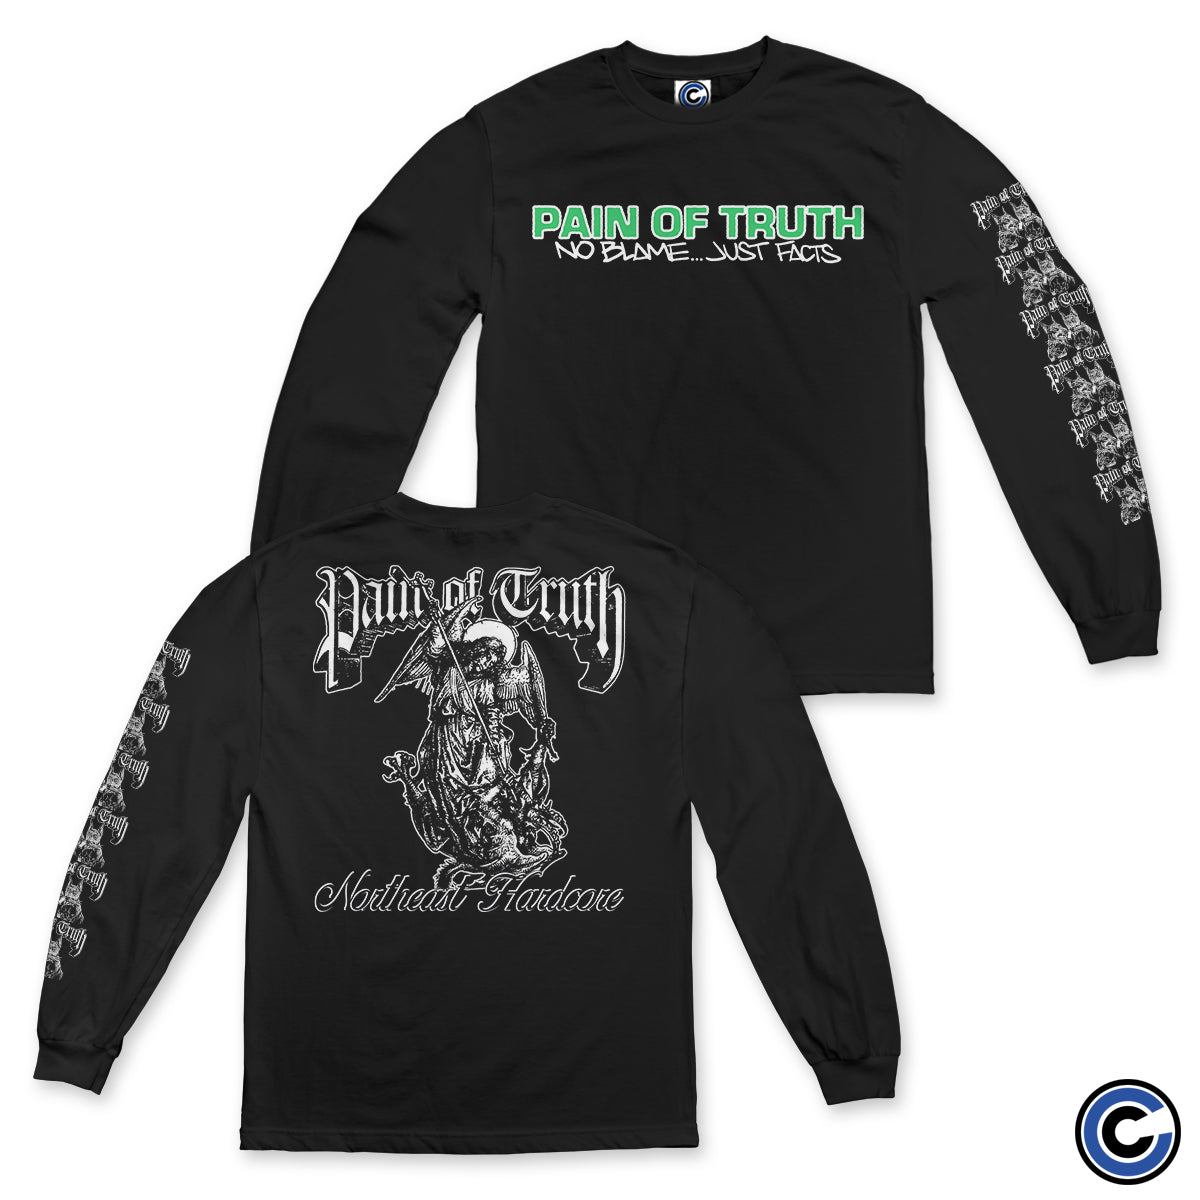 Pain of Truth "No Blame" Long Sleeve